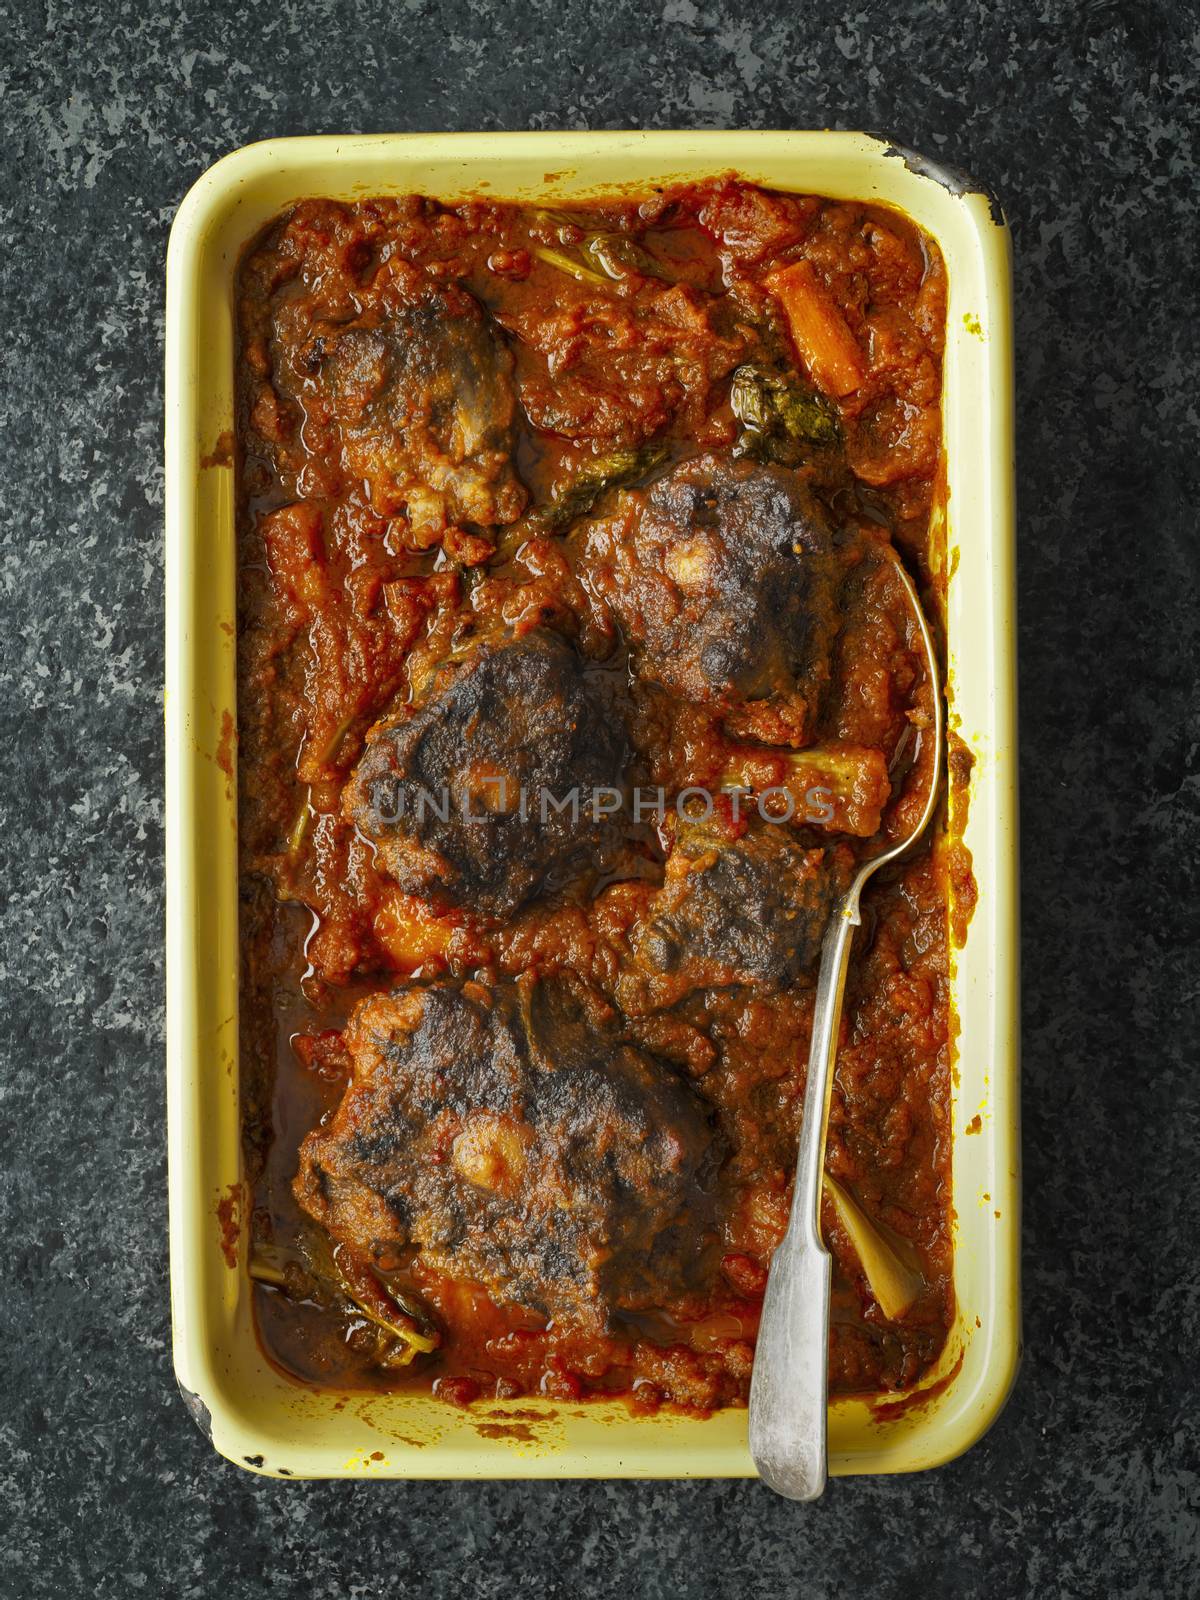 rustic italian oxtail stew by zkruger